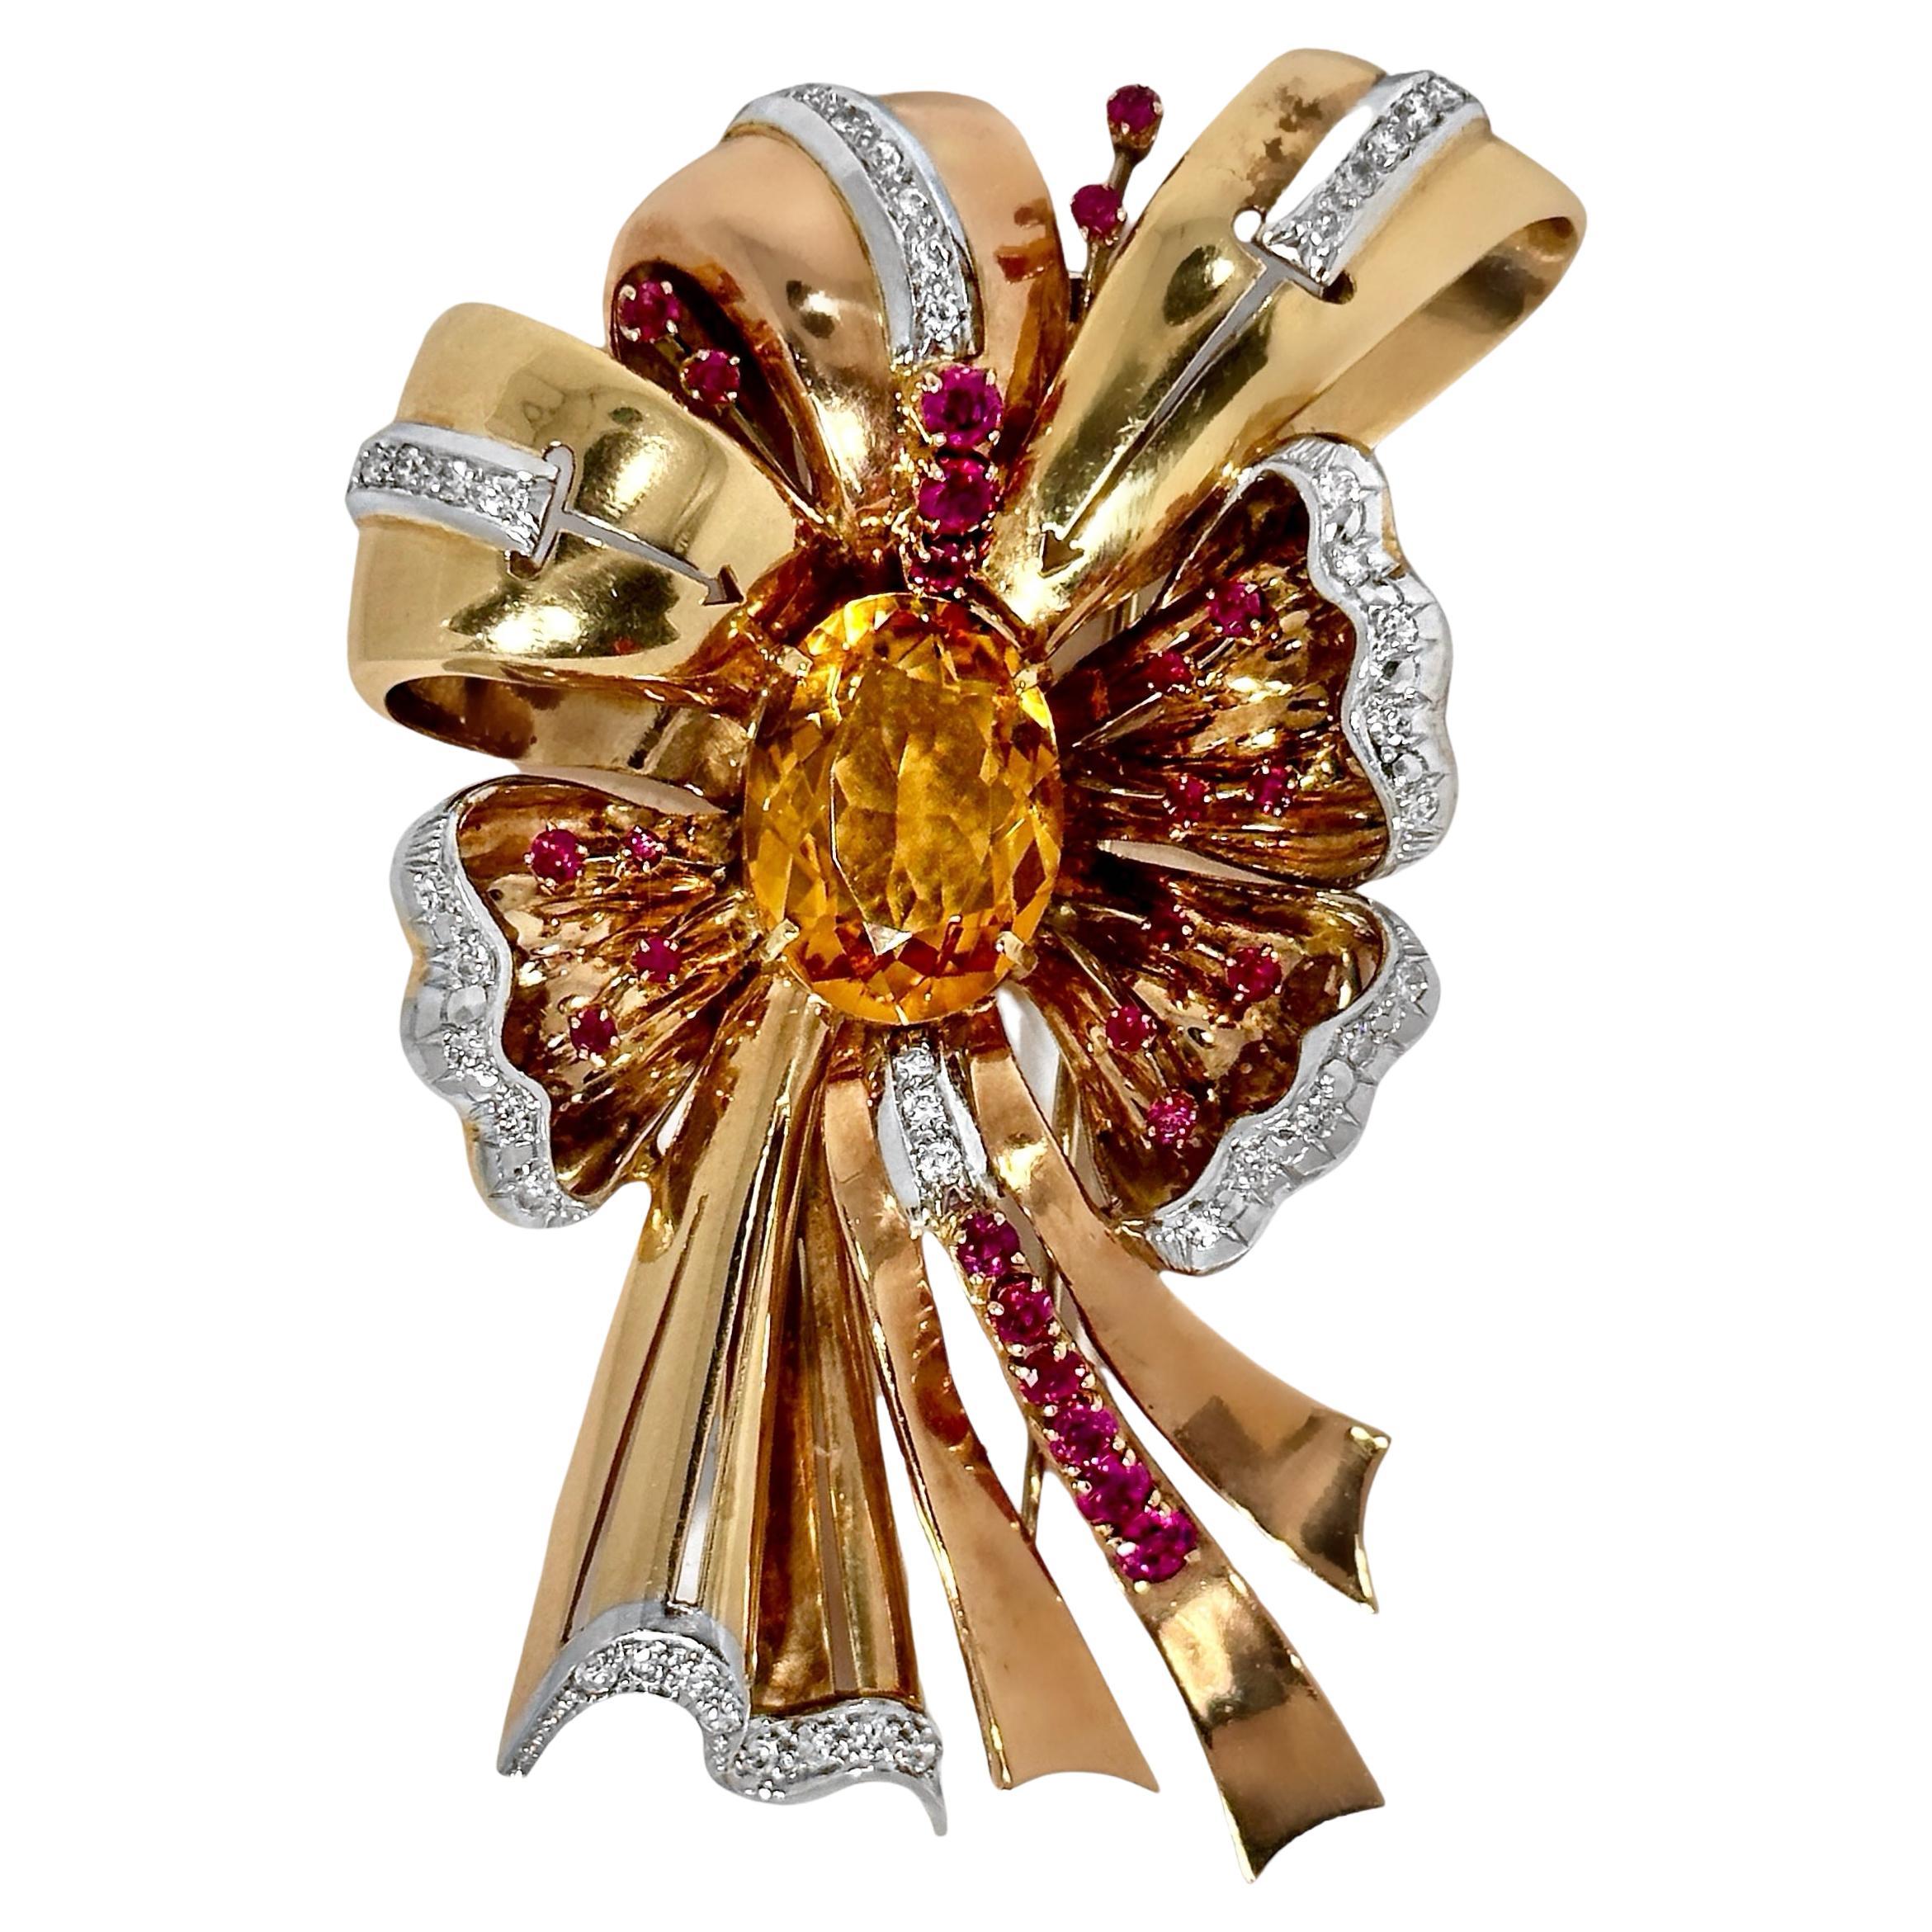 This colossal scale 14k pink gold, golden citrine, ruby and diamond Retro period brooch positively exudes the heady spirit and expansive feel of the Mid-20th Century, here in America. With dimensions of 3 1/2 inches in length by 2 3/8 inches in